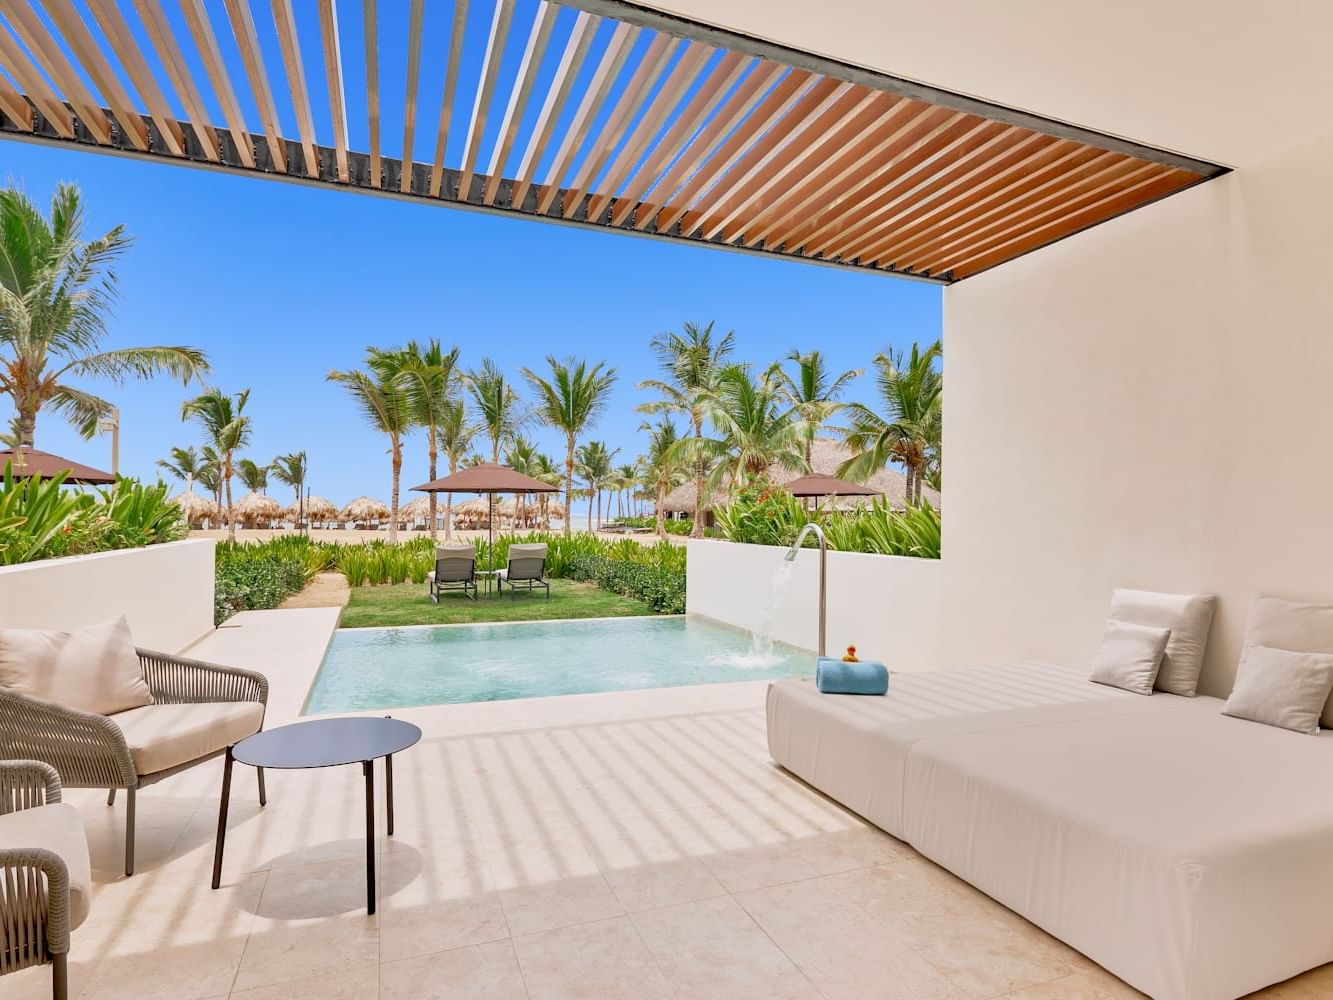 Outdoor pool with lounge area in Tierra Suite at Live Aqua Punta Cana